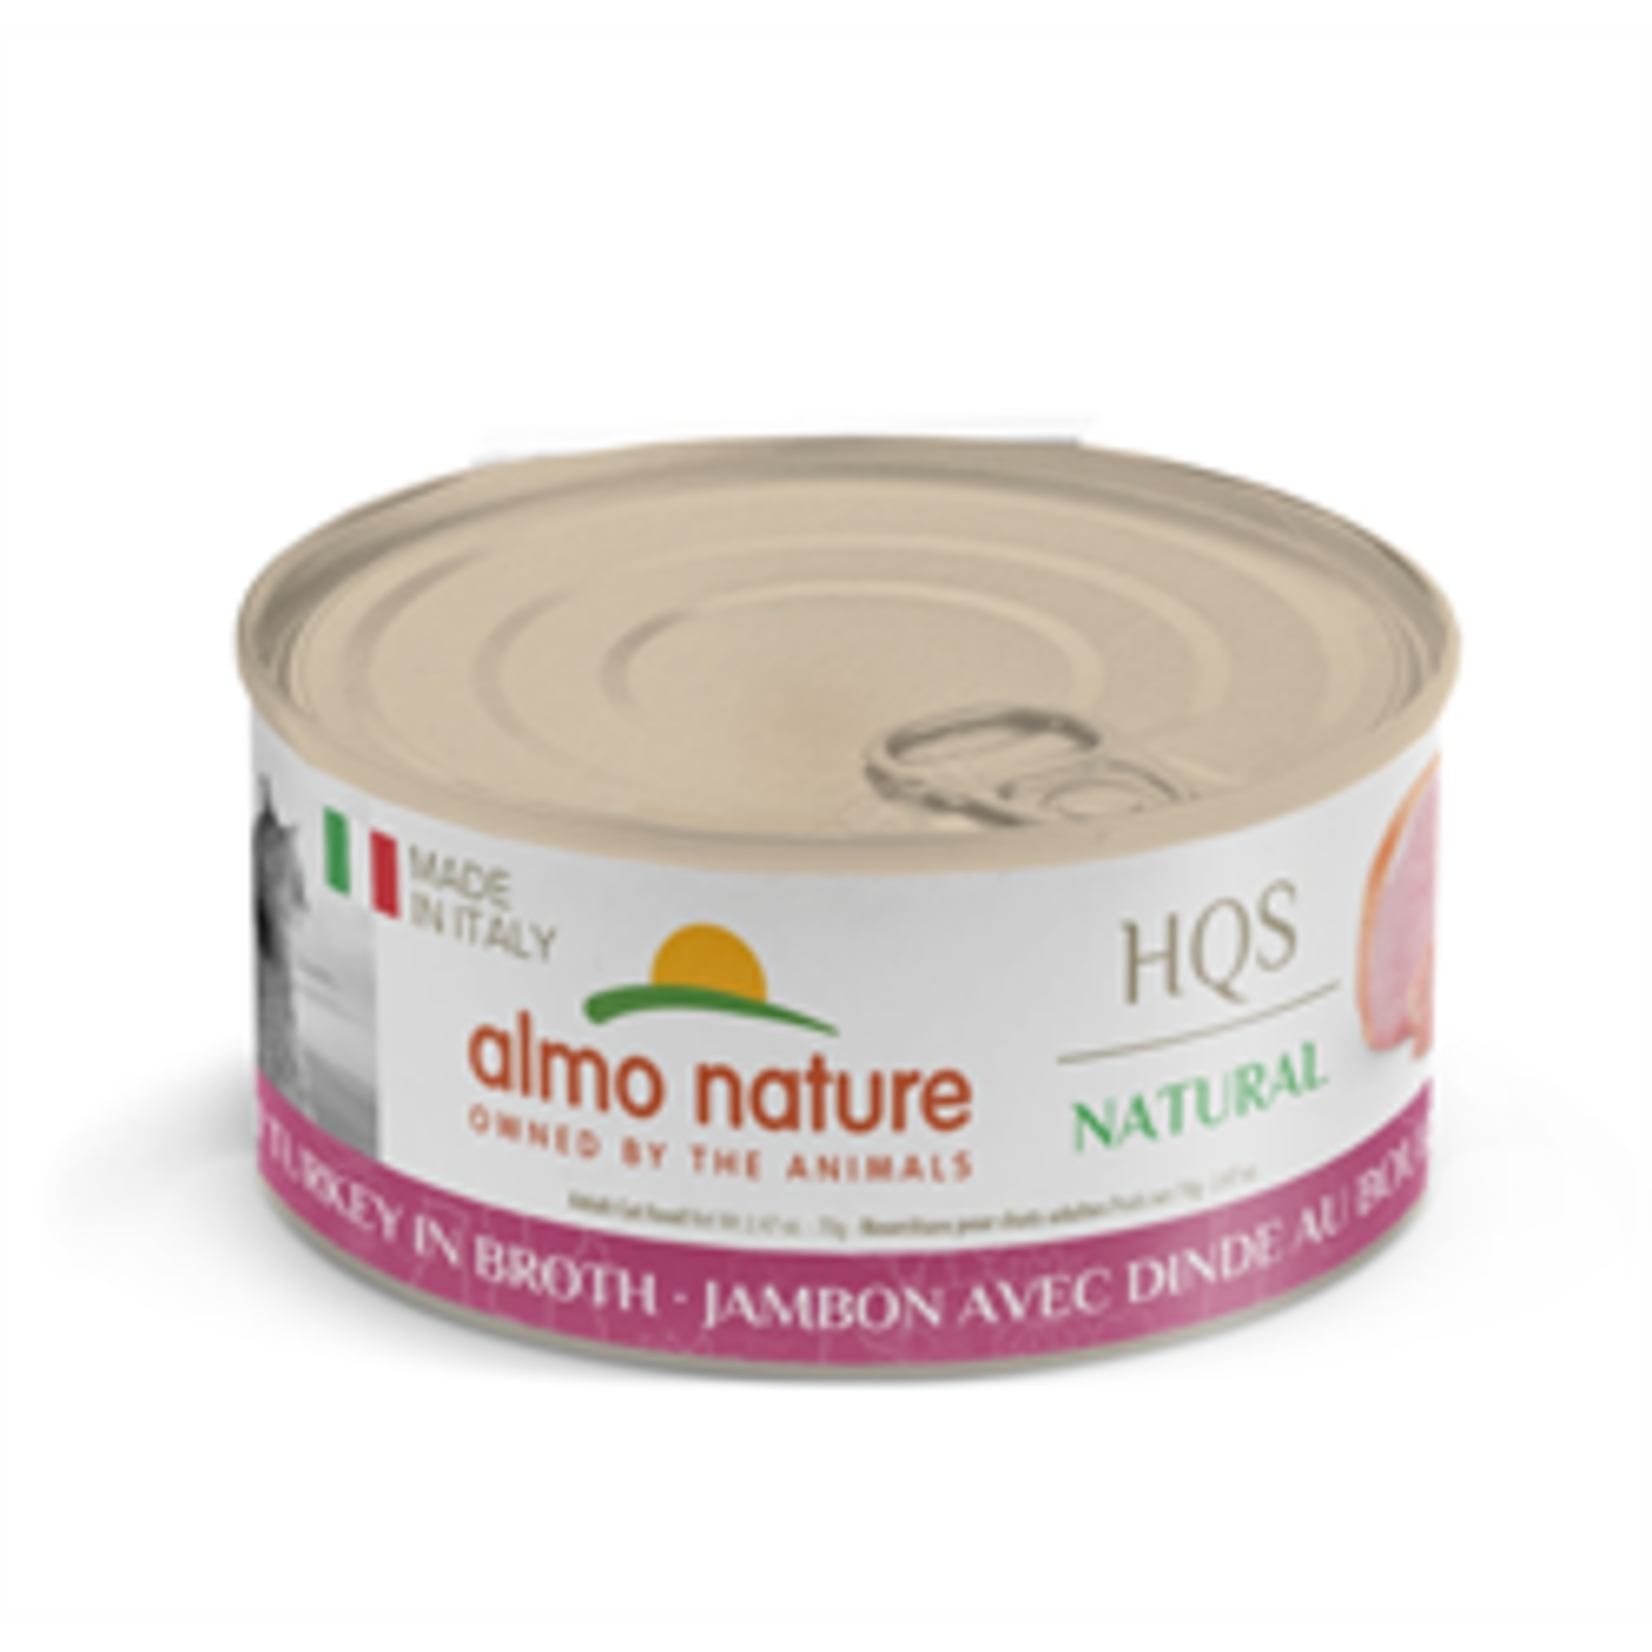 Almo Nature Almo Nature - HQS Natural Canned Cat Food - Made in Italy